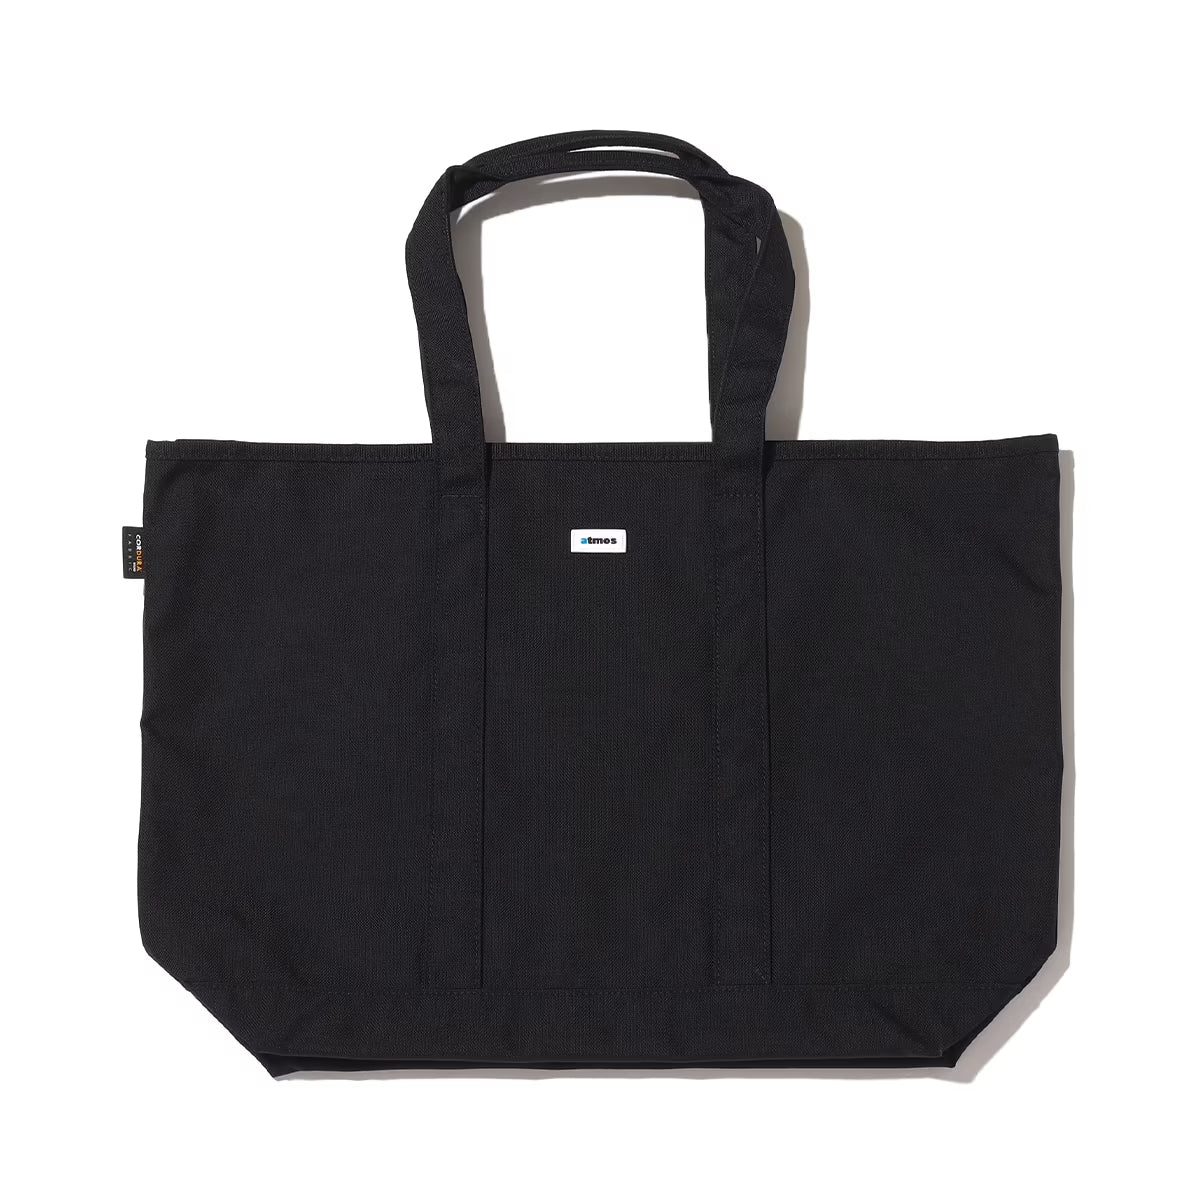 ATMOS EMBROIDERY CLASSIC LOGO CANVAS TOTE